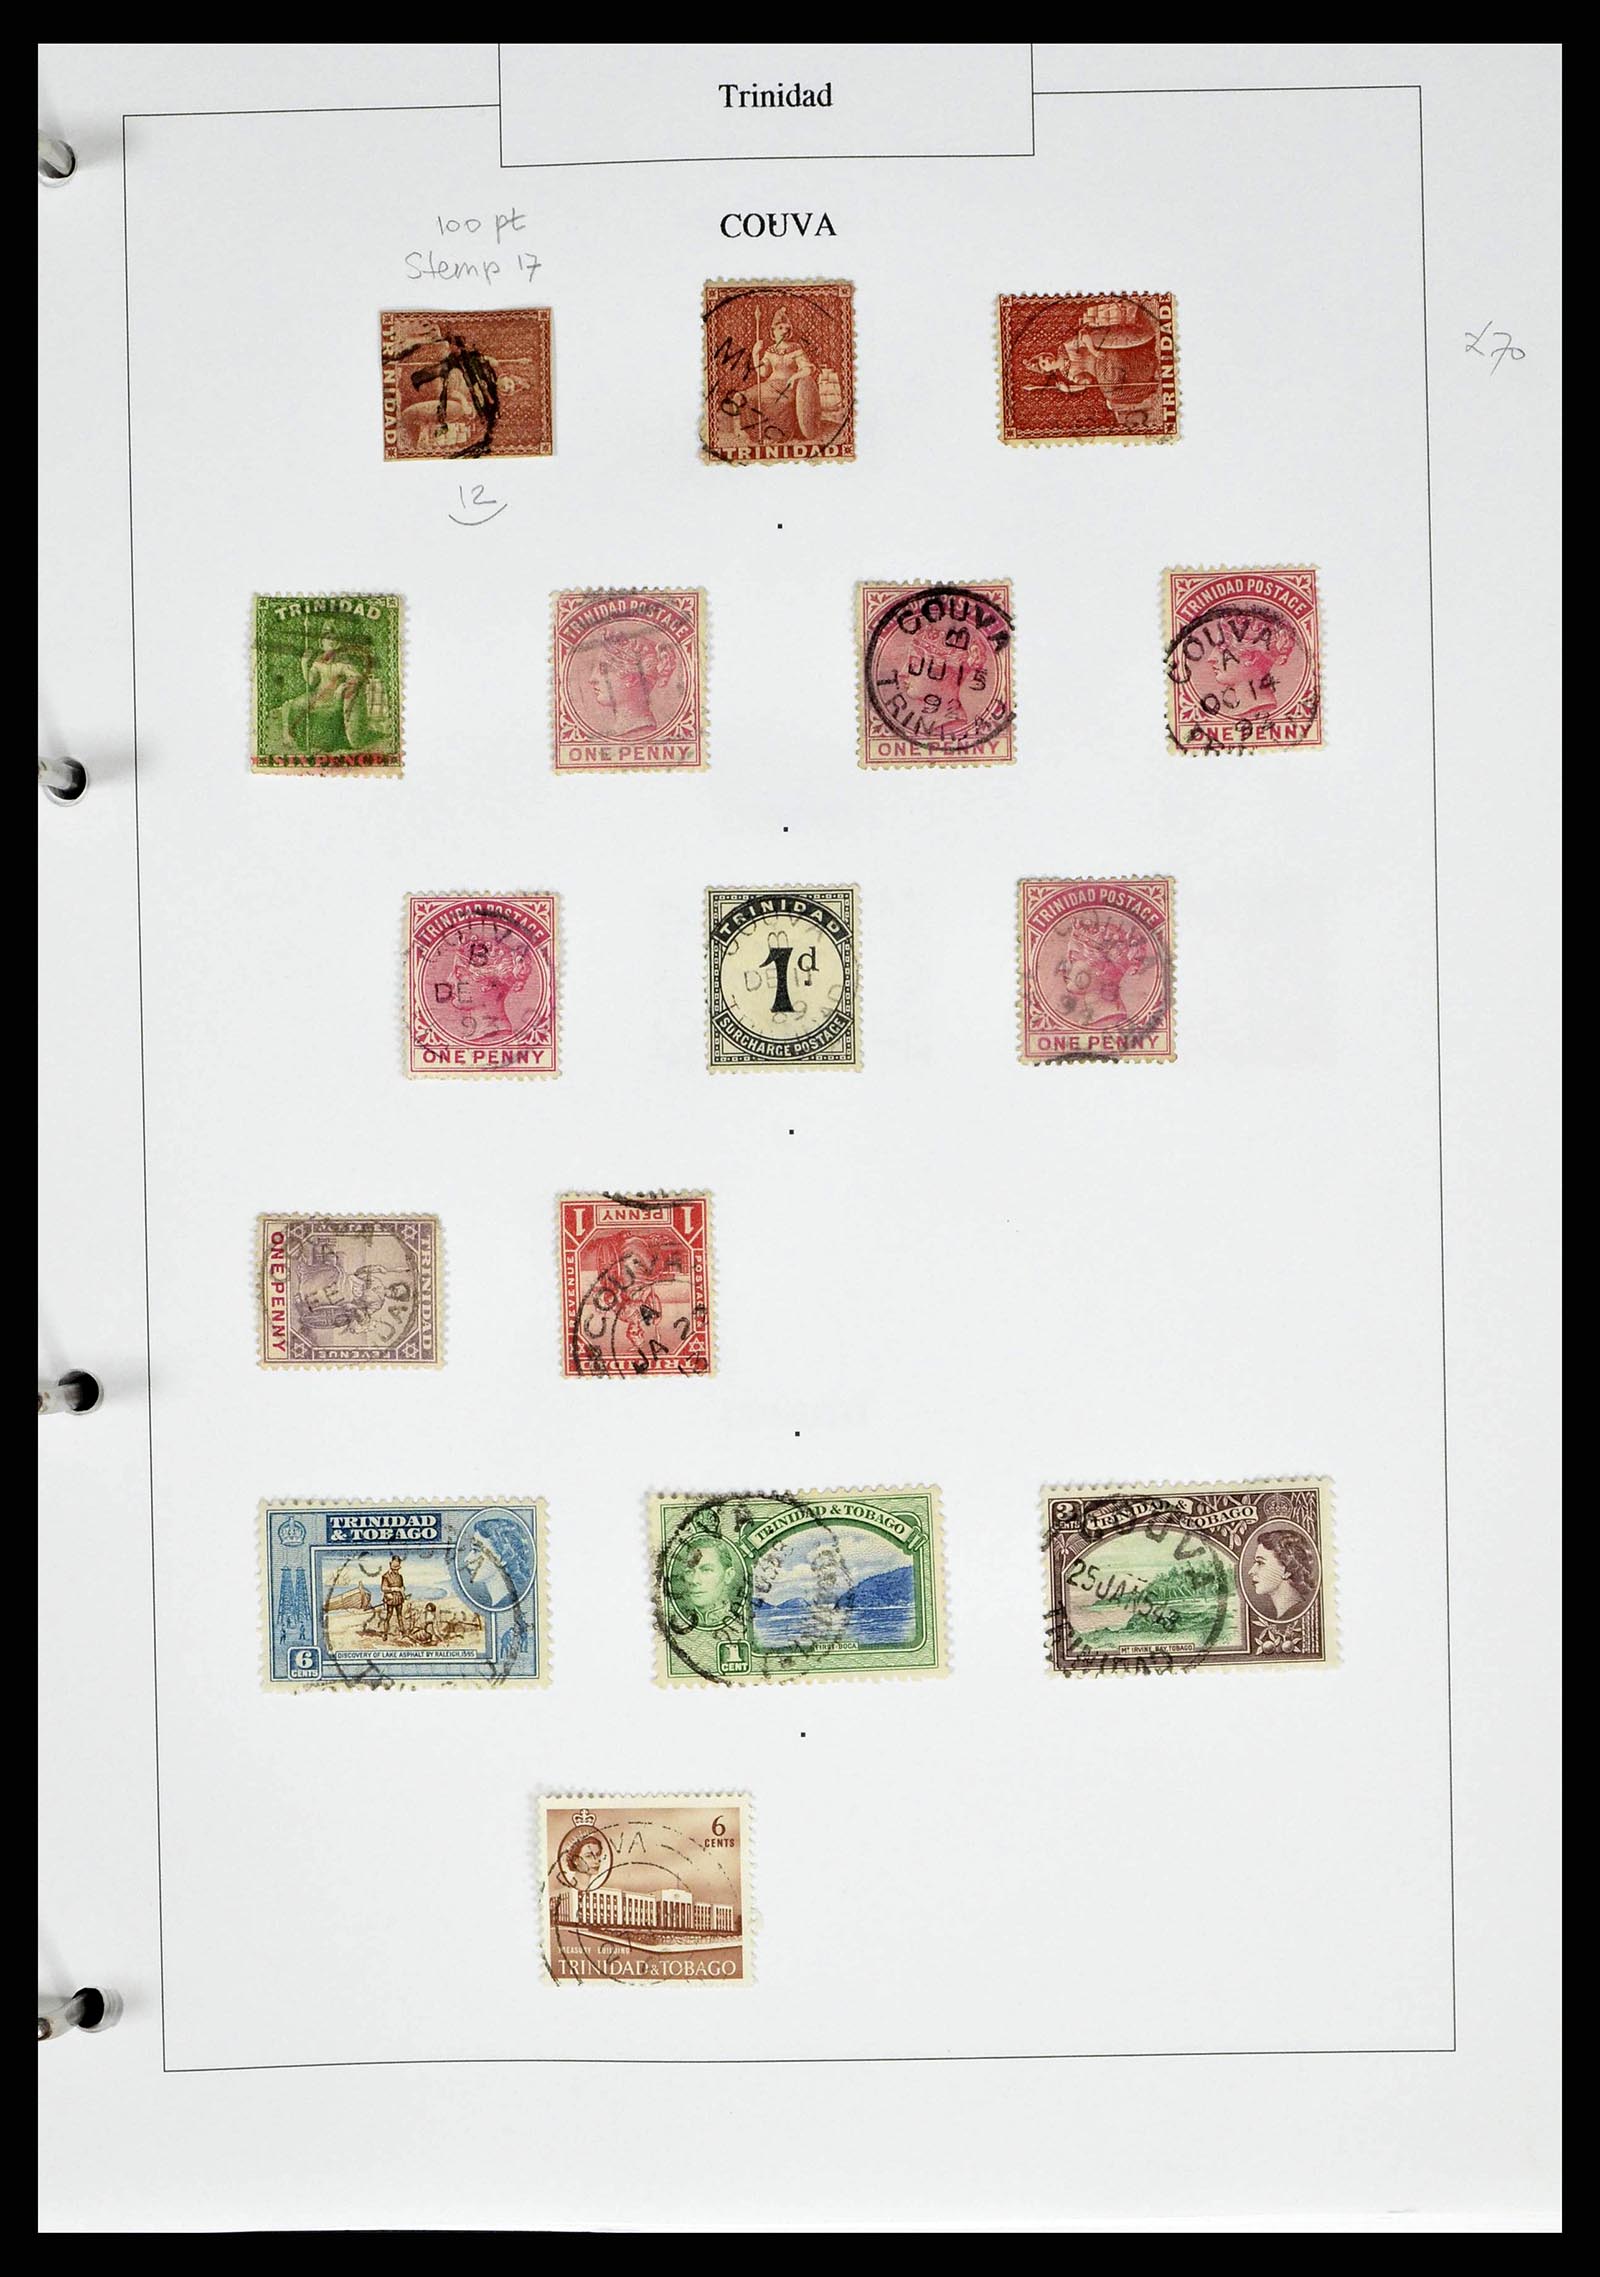 38481 0023 - Stamp collection 38481 Trinidad and Tobago cancels 1859-1960.